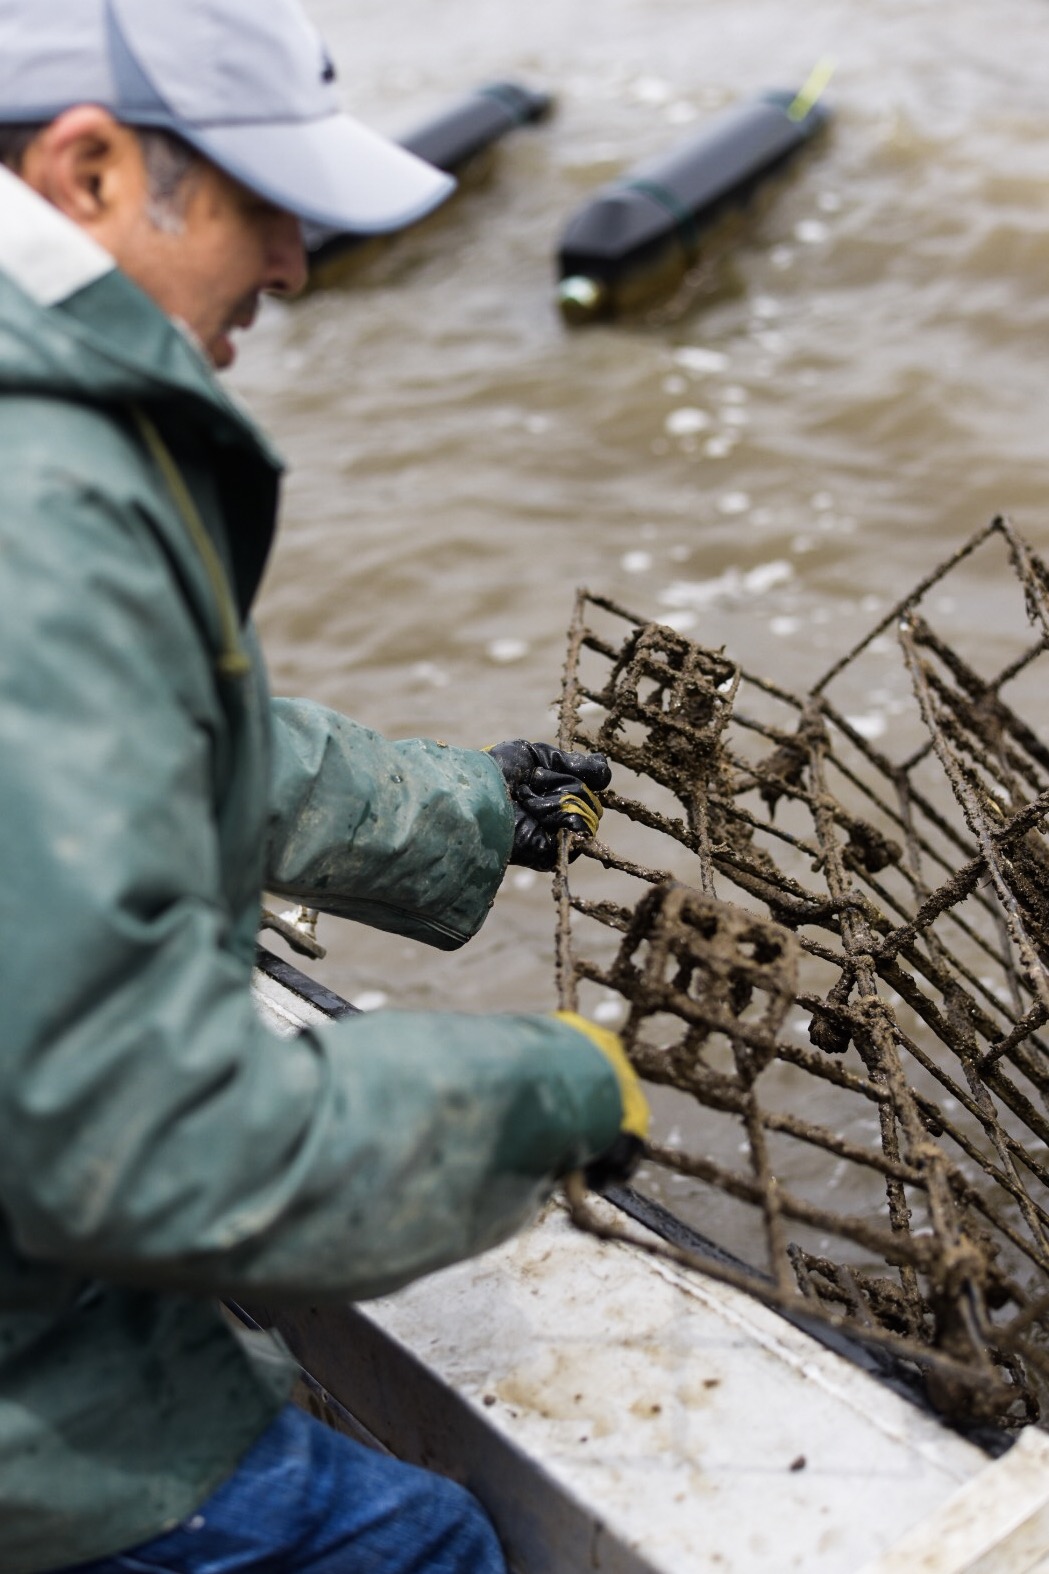 Pulling an oyster cage. These oysters are cultivated off-bottom and harvested to order.